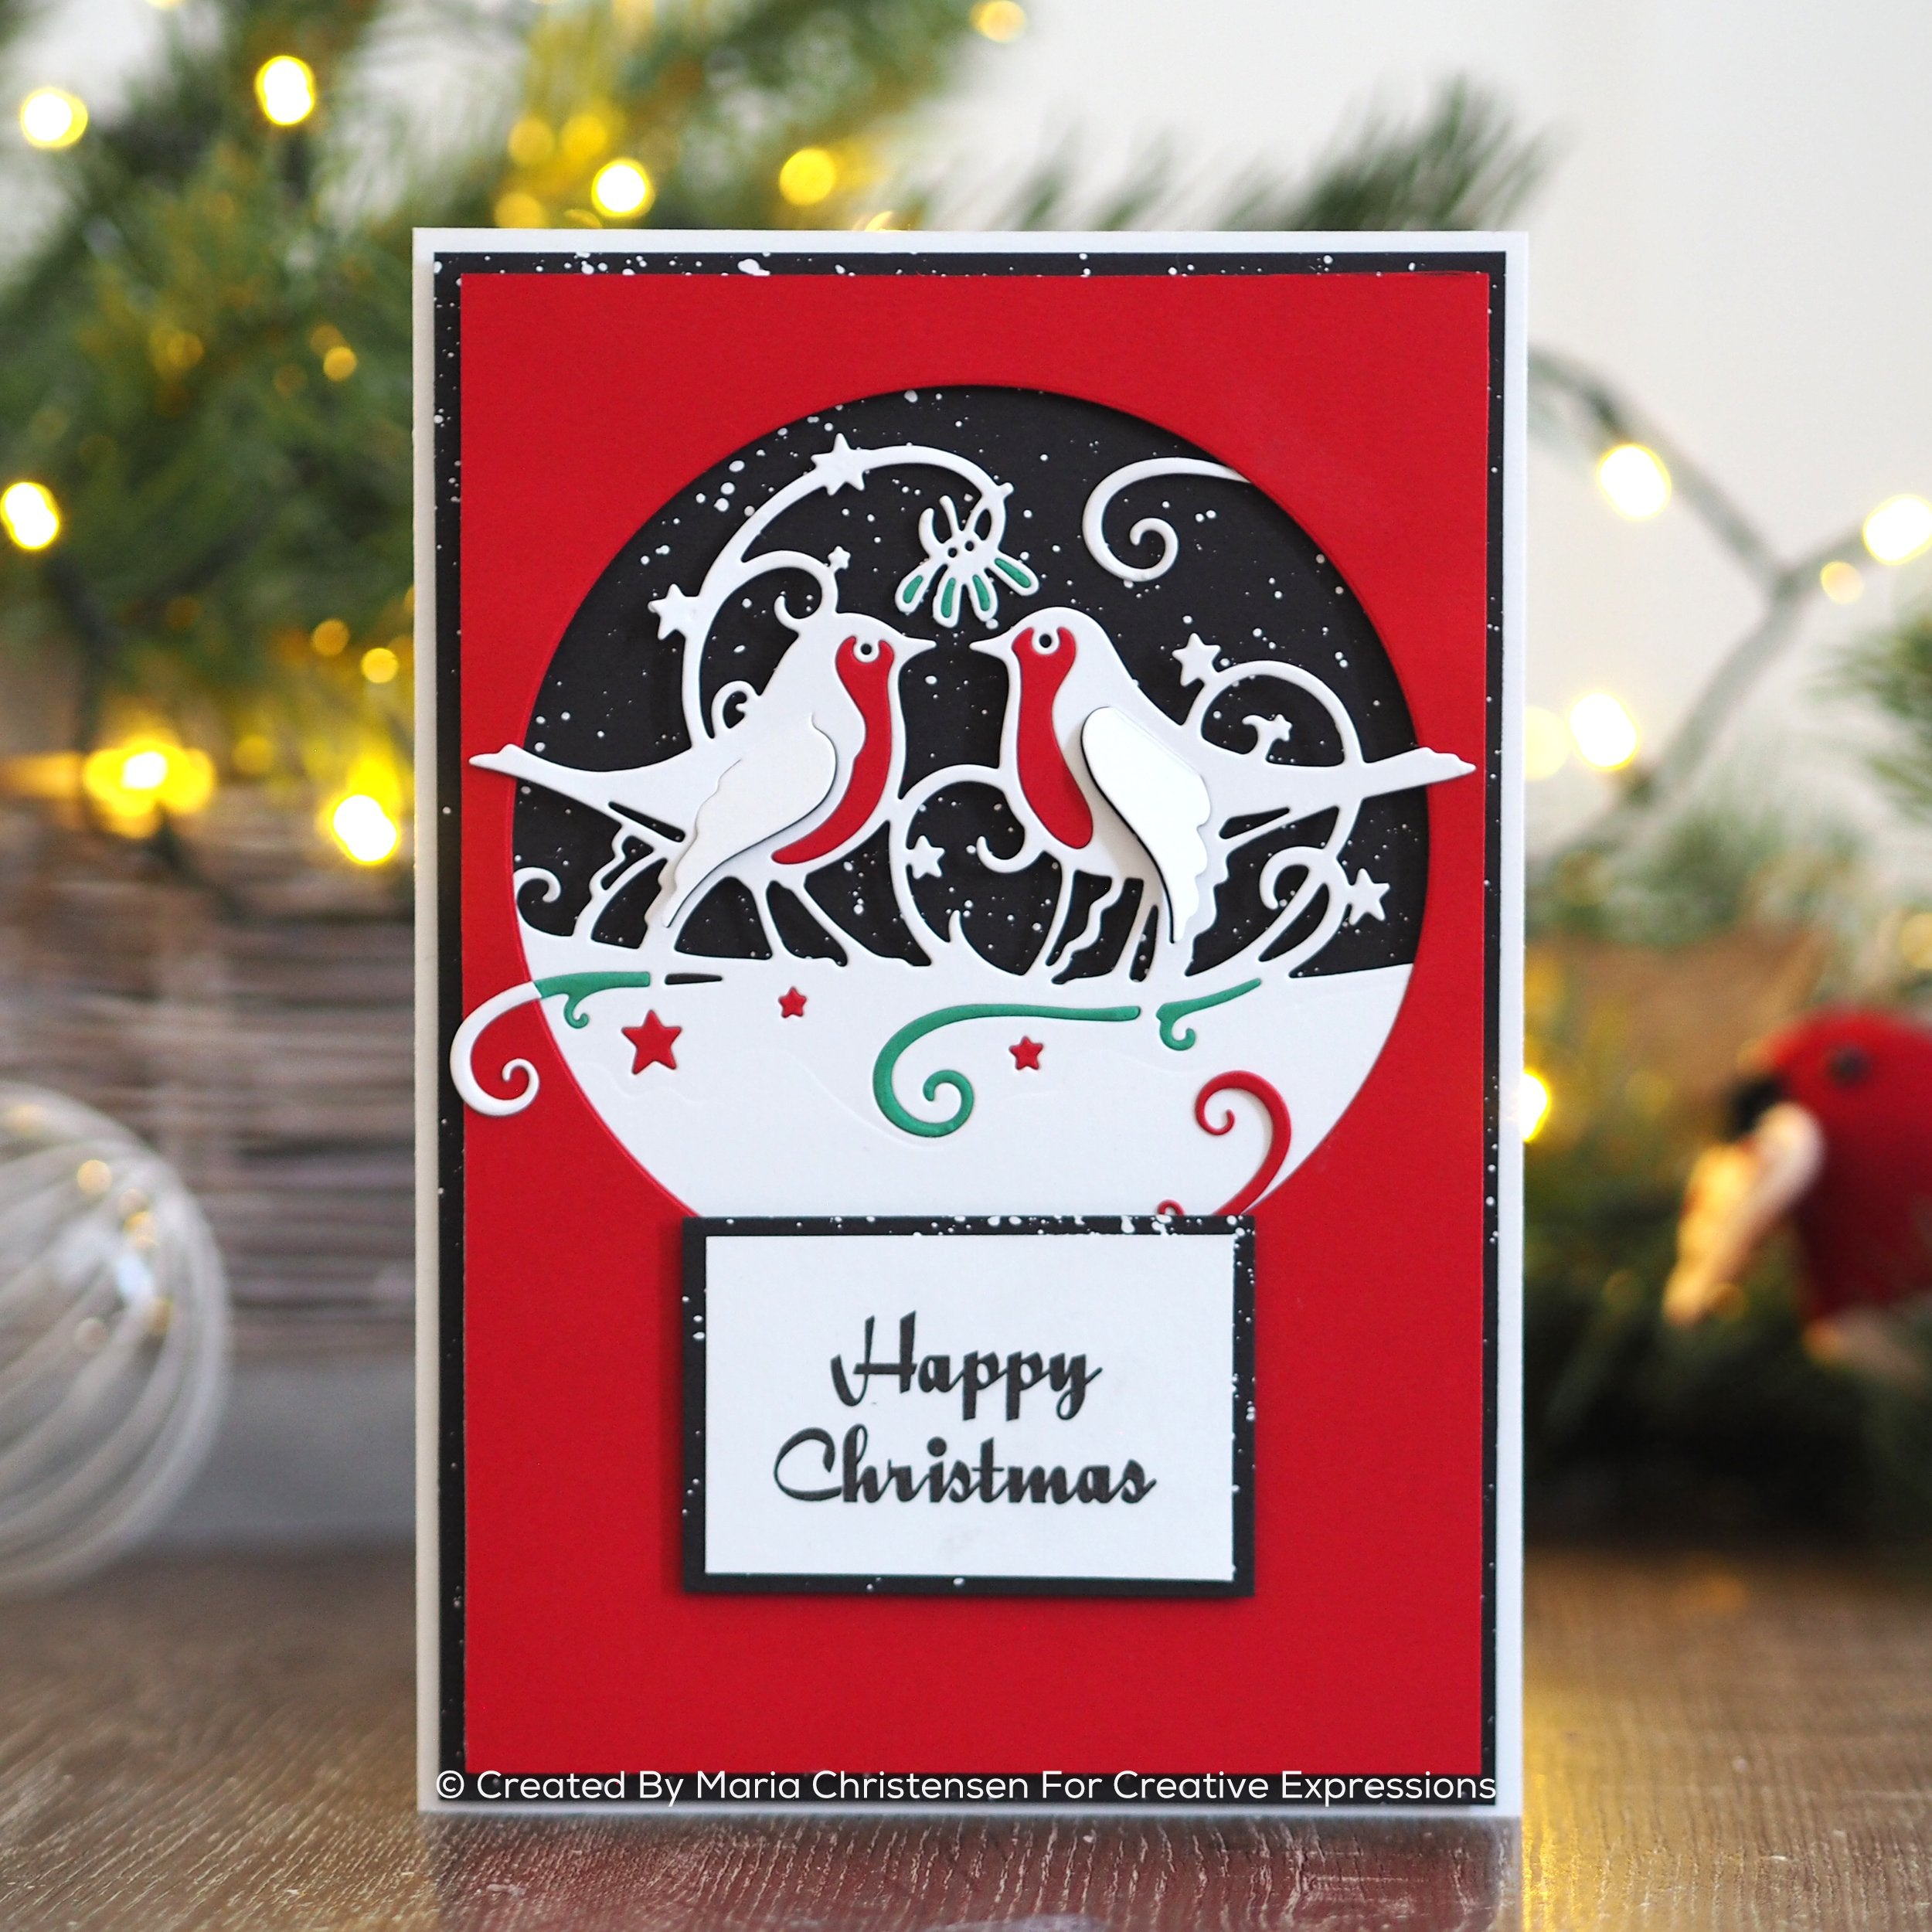 Creative Expressions Paper Cuts Edger Under the Mistletoe Craft Die